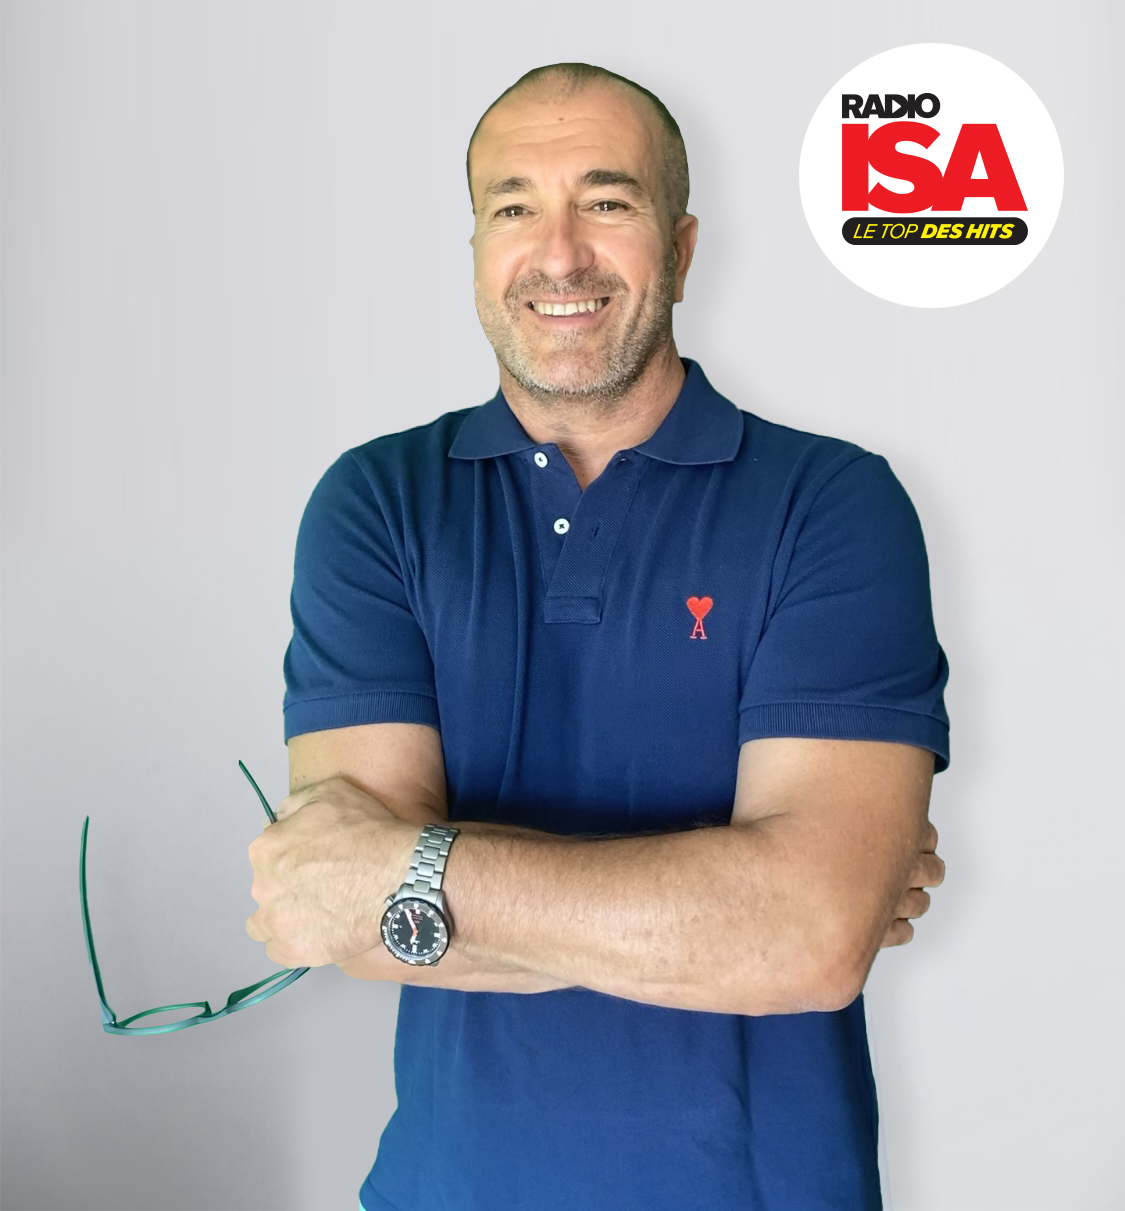 Thierry Lanfray, manager commercial Radio ISA.